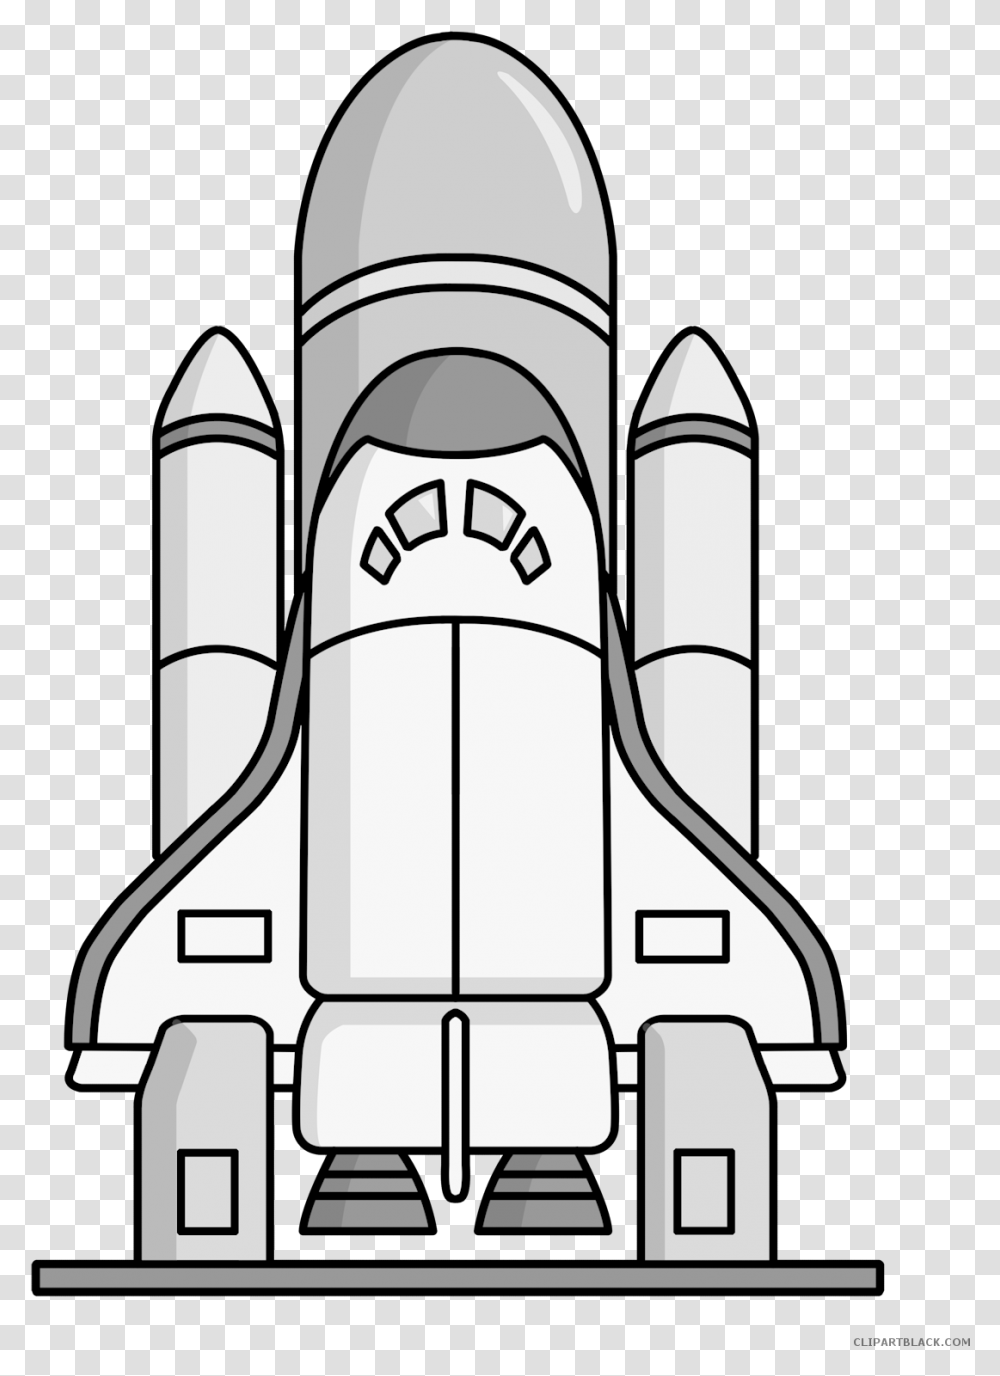 Space Shuttle Transportation Free Black White Clipart, Spaceship, Aircraft, Vehicle, Rocket Transparent Png